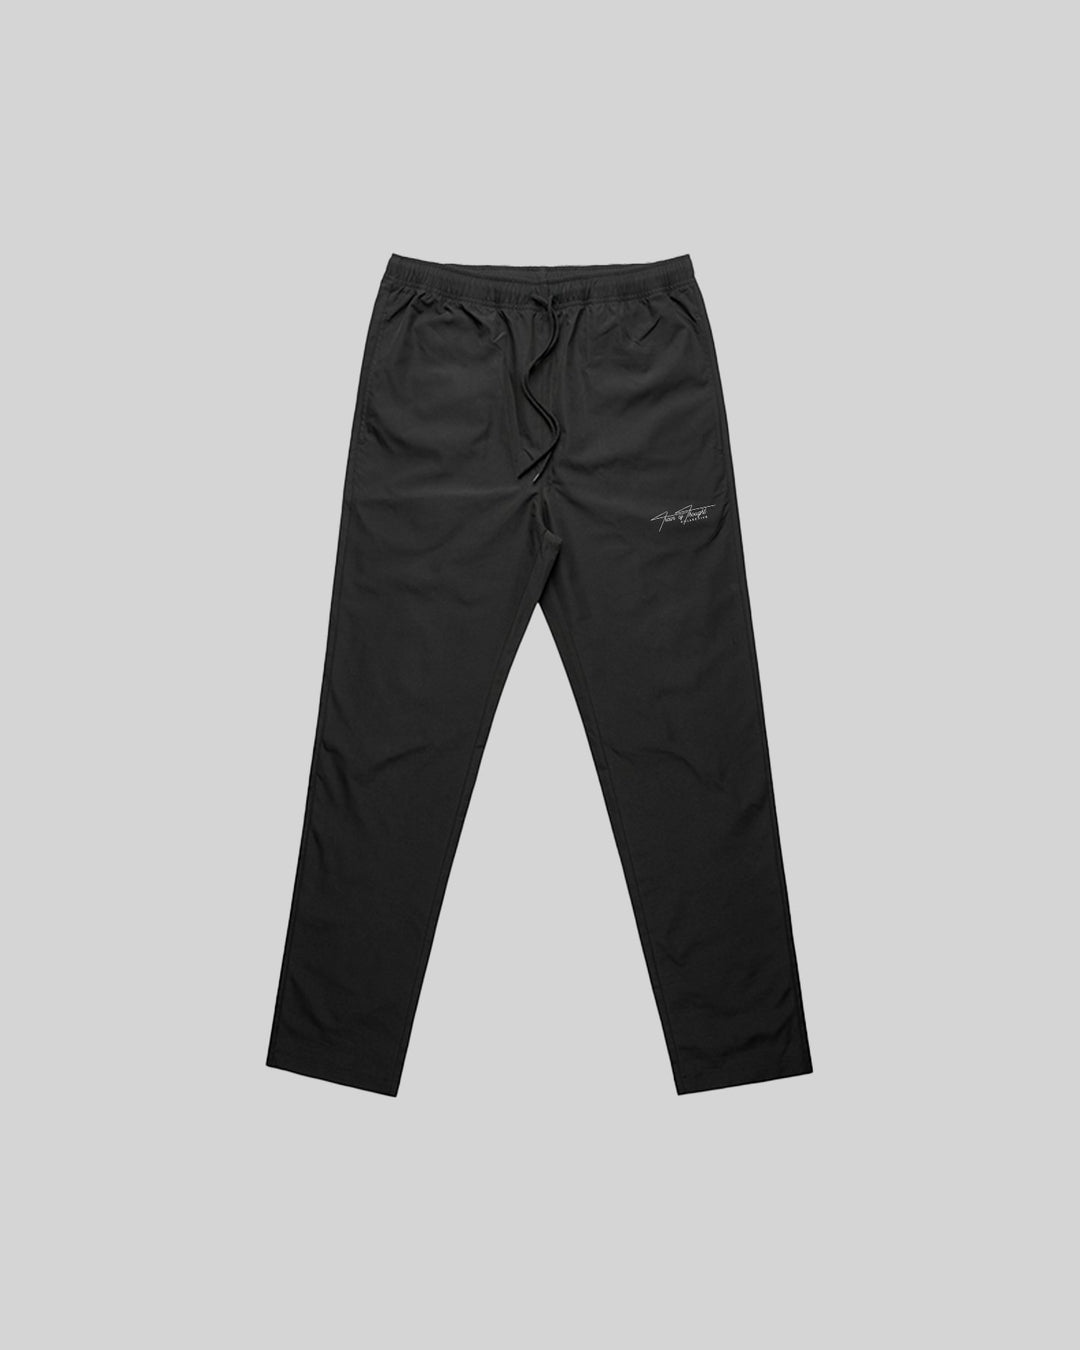 Blackout Active Training Pants - trainofthoughtcollective